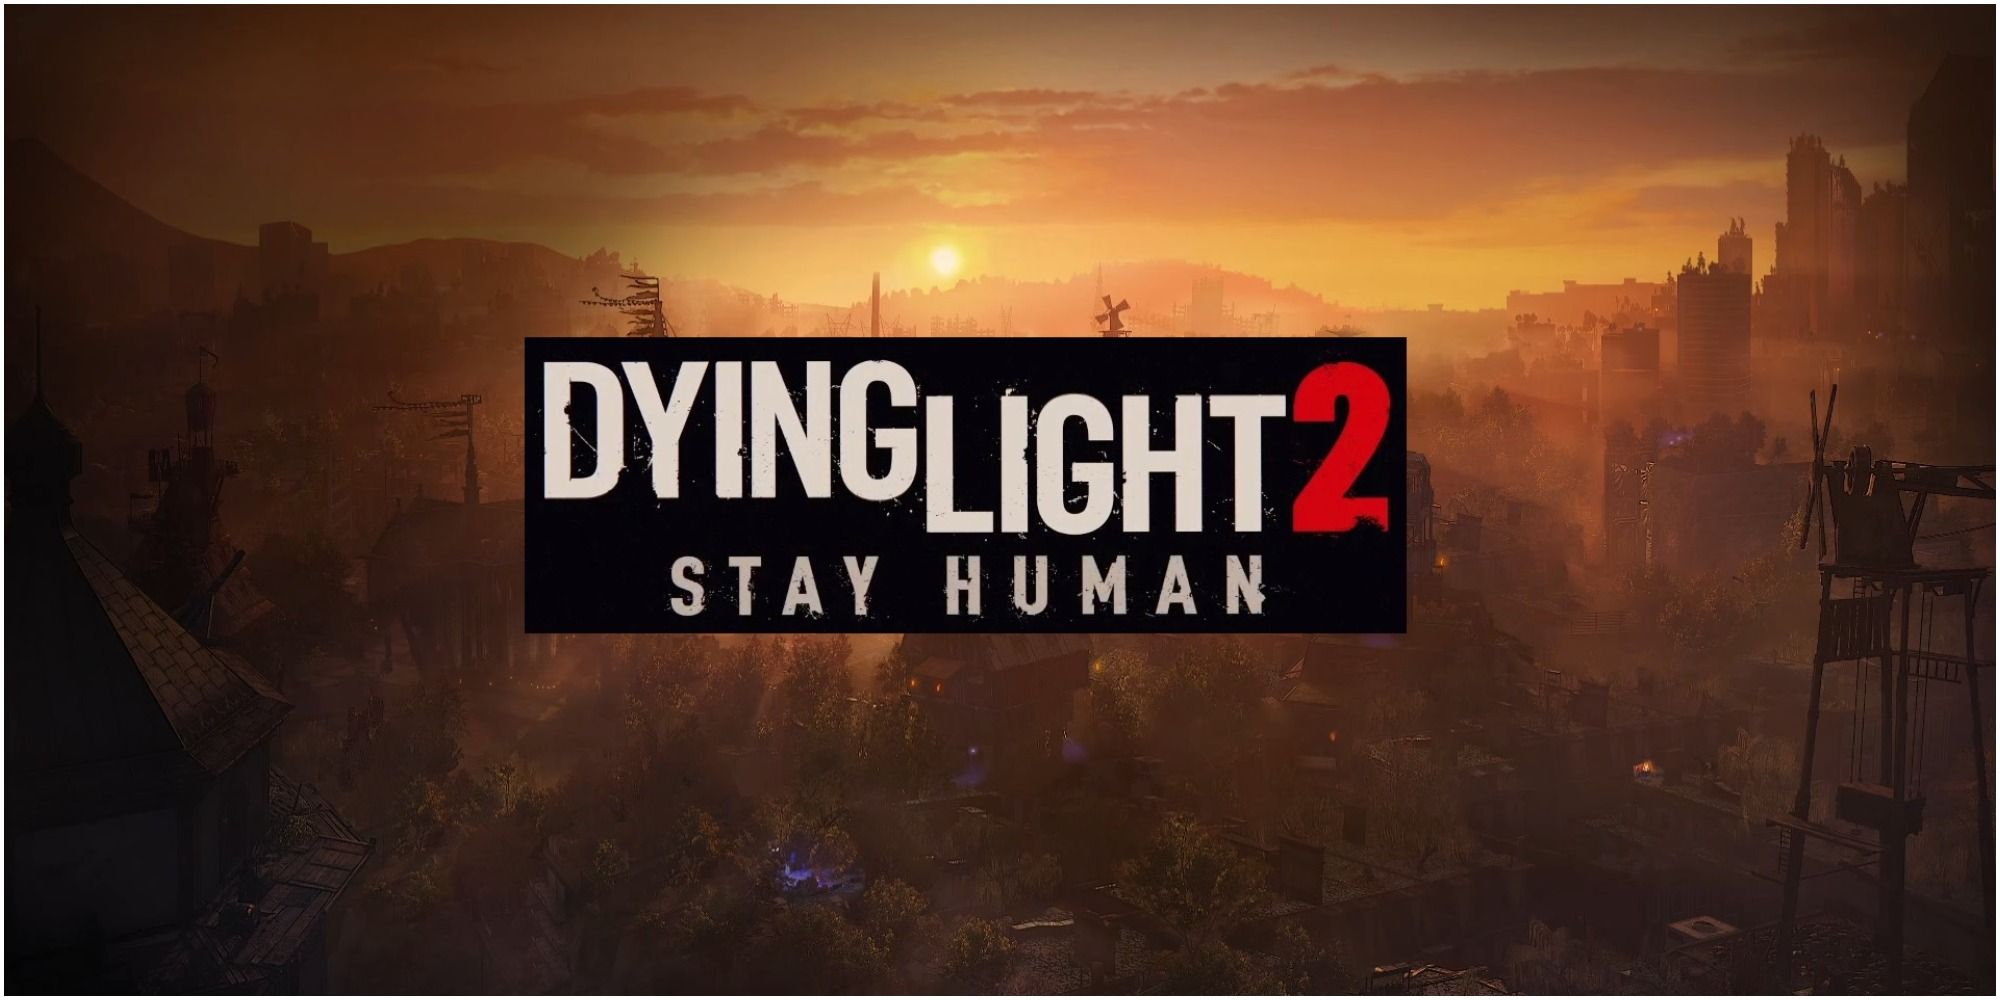 Dying Light: Bad Blood free to all owners of Dying Light on all